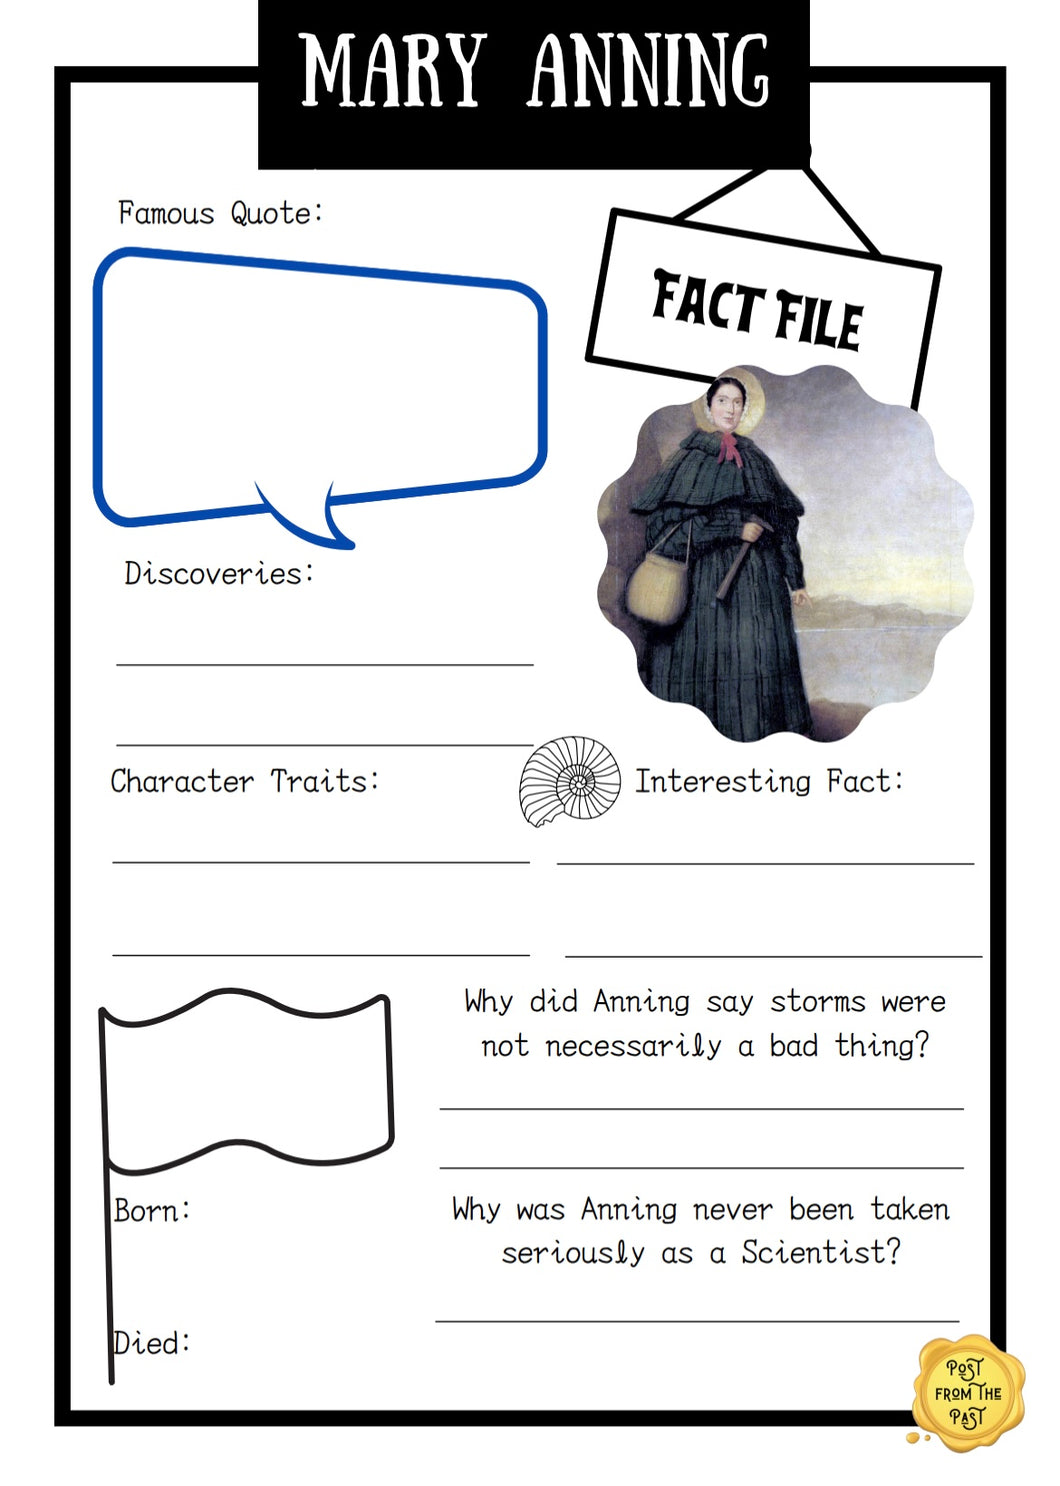 Mary Anning Fact File